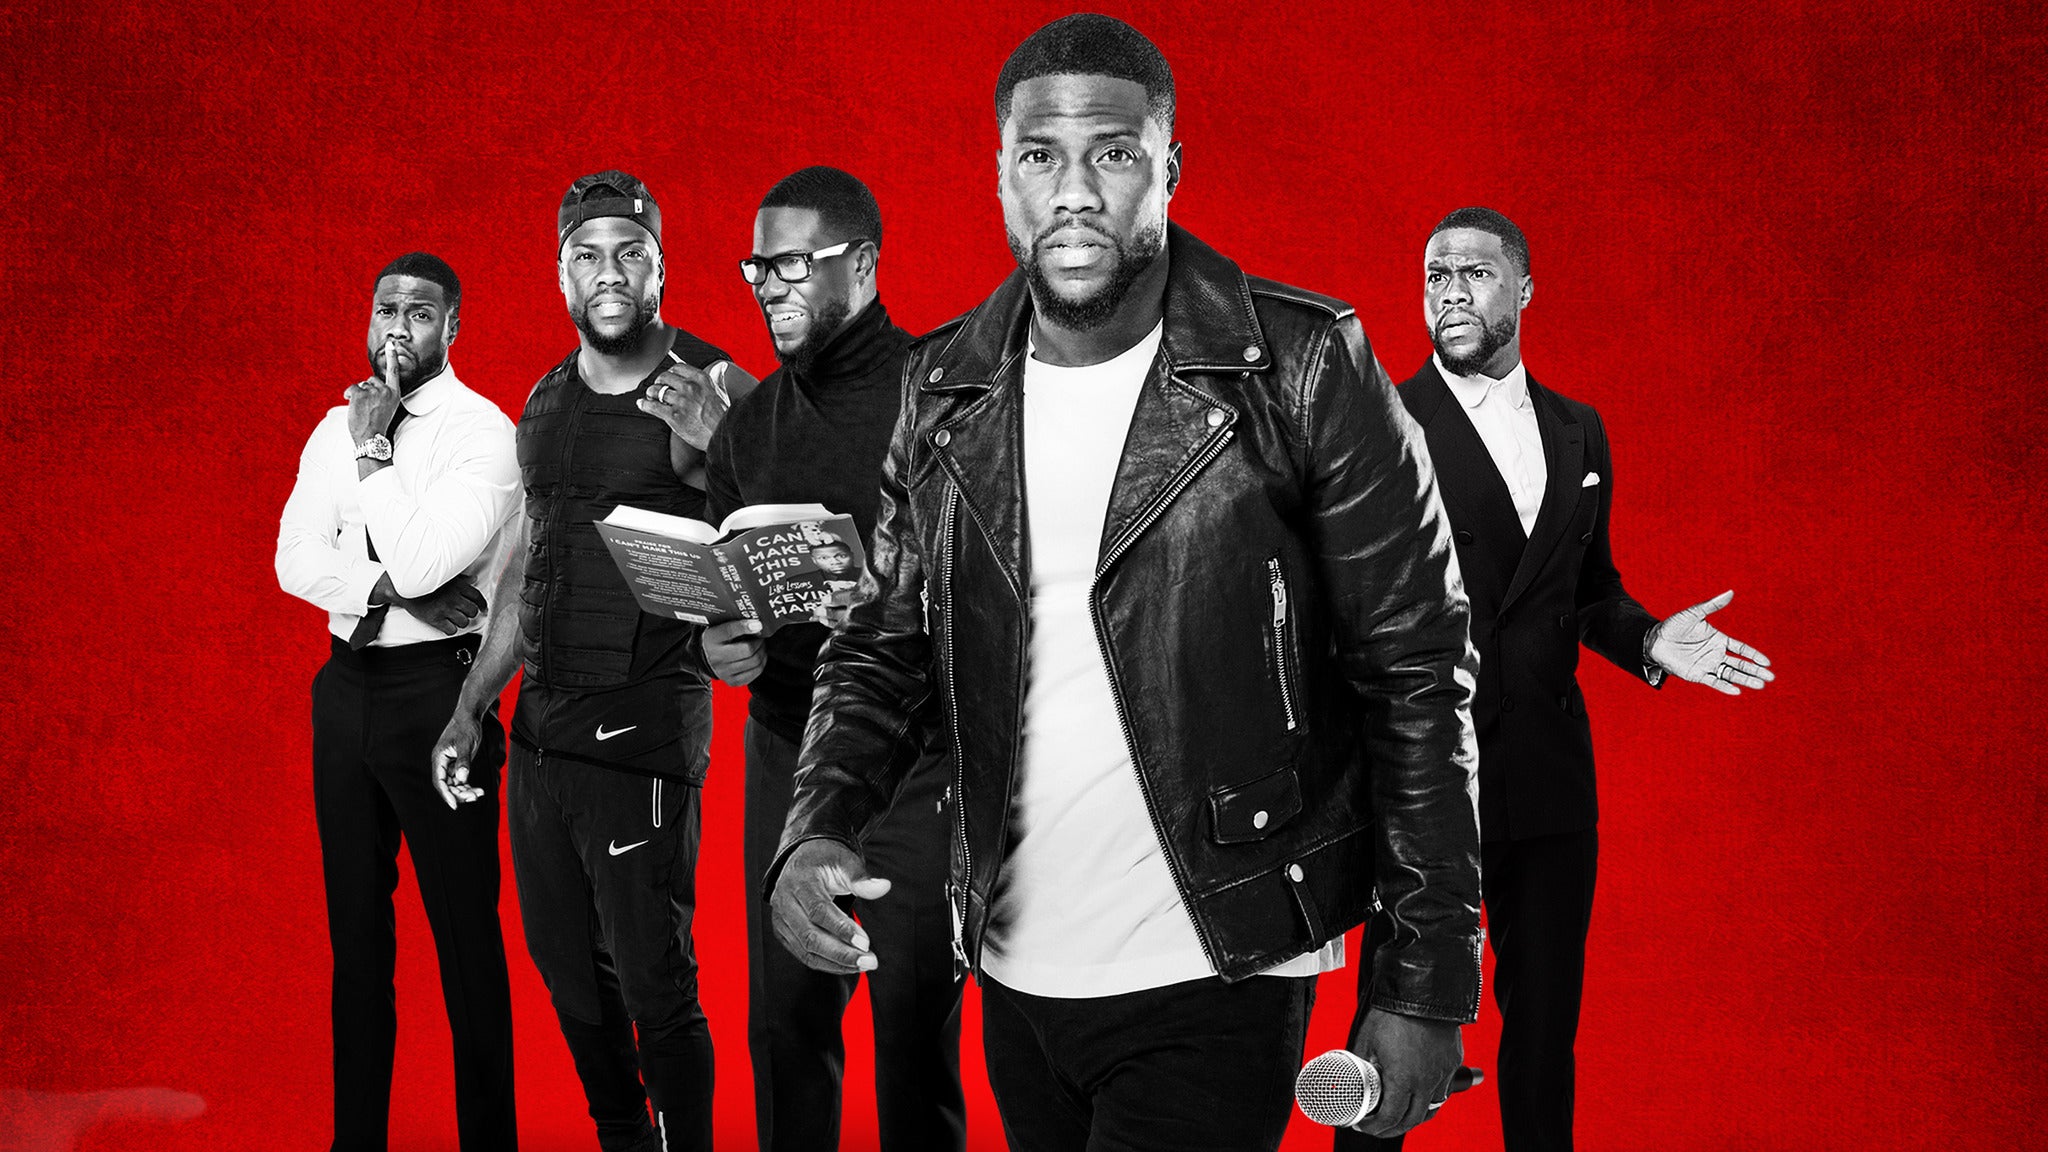 who does kevin hart tour with